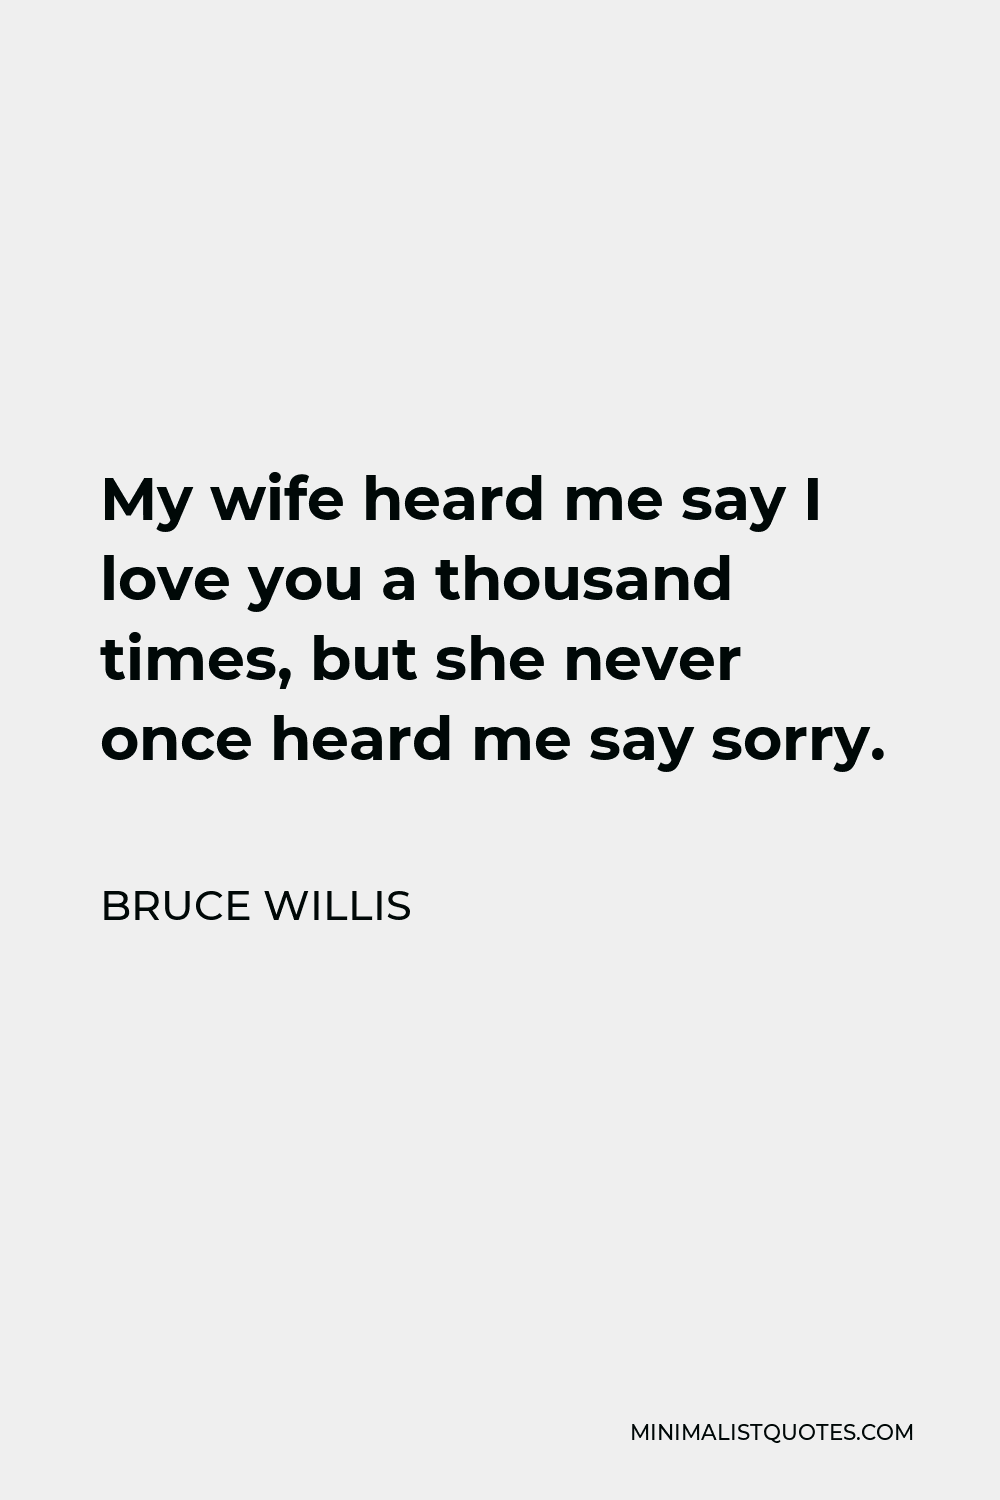 Bruce Willis Quote - My wife heard me say I love you a thousand times, but she never once heard me say sorry.